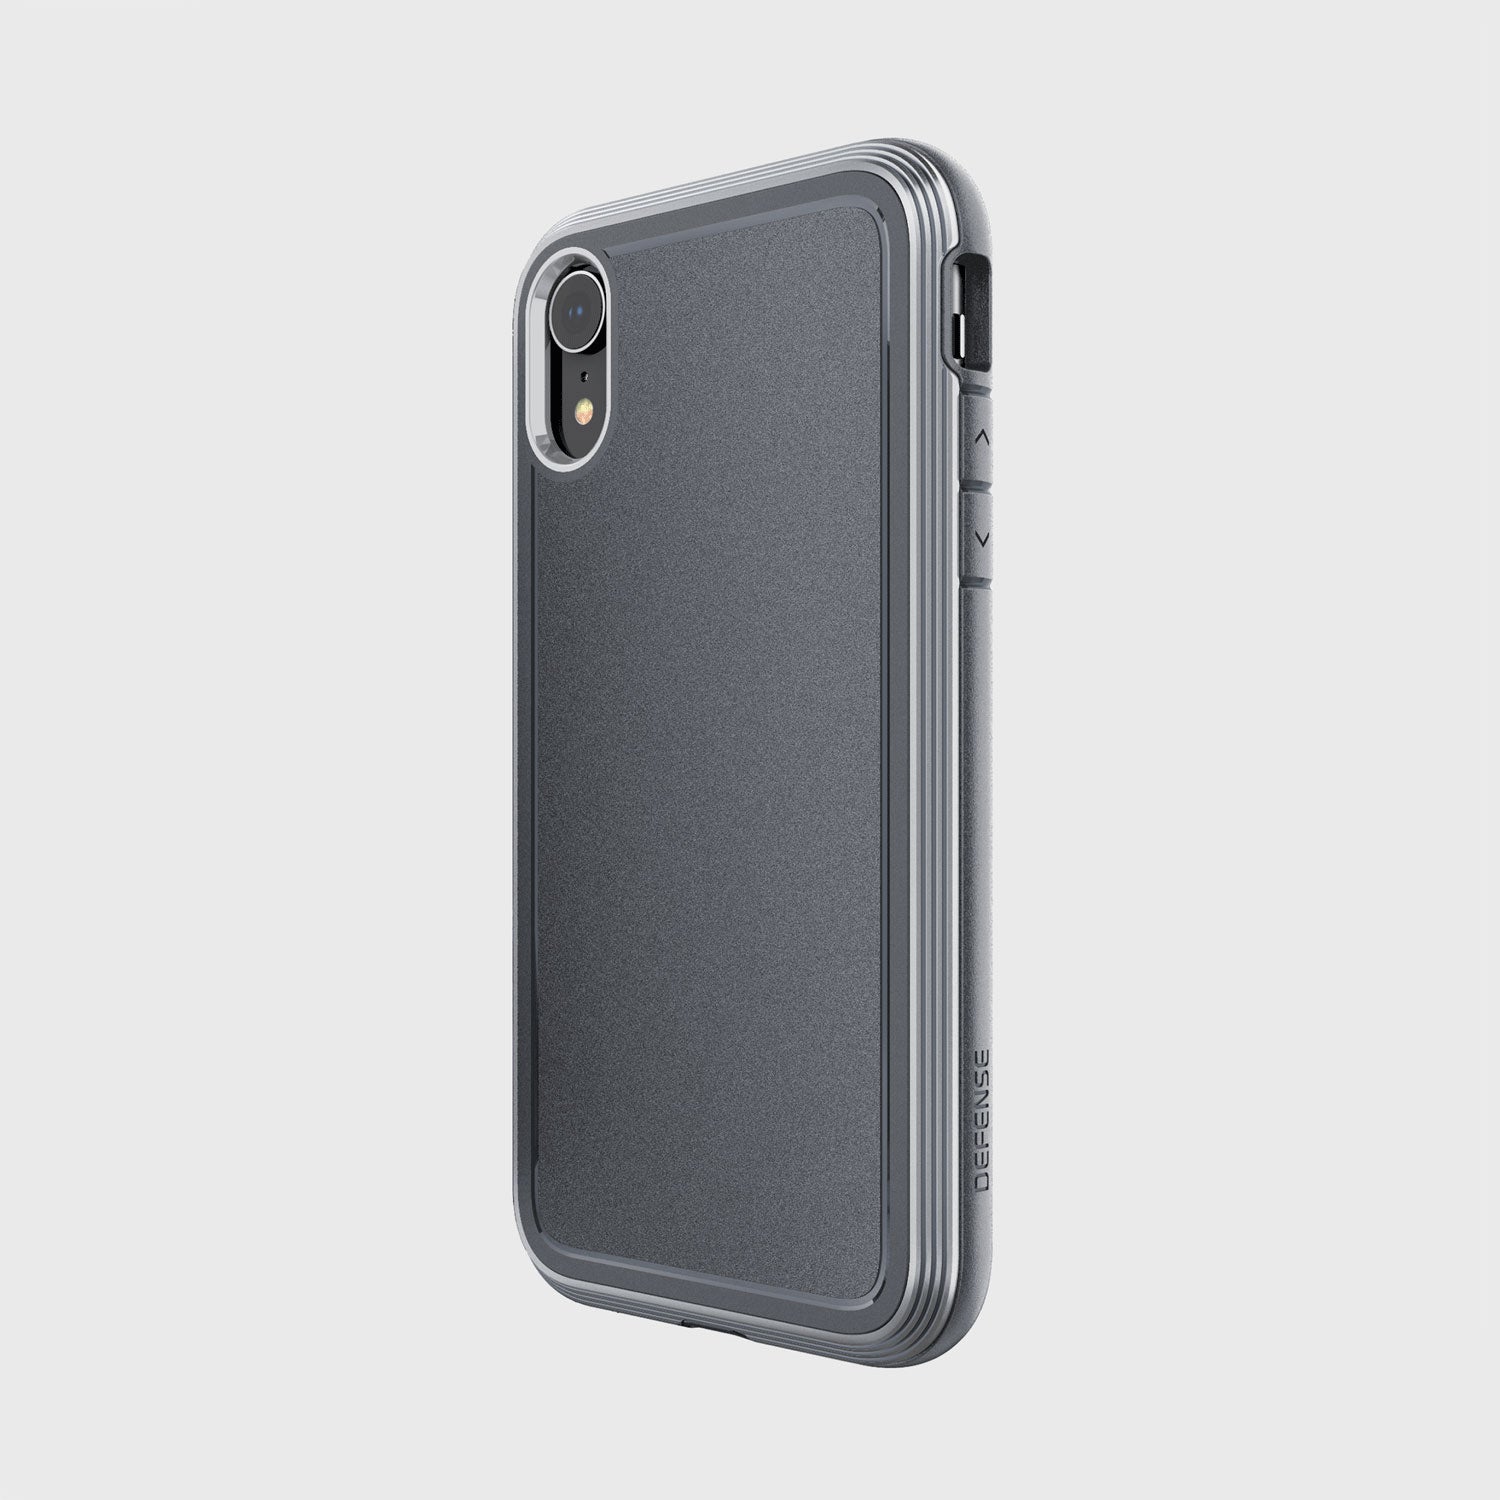 The Raptic ULTRA case provides device protection for the iPhone XR, showcasing its back view.